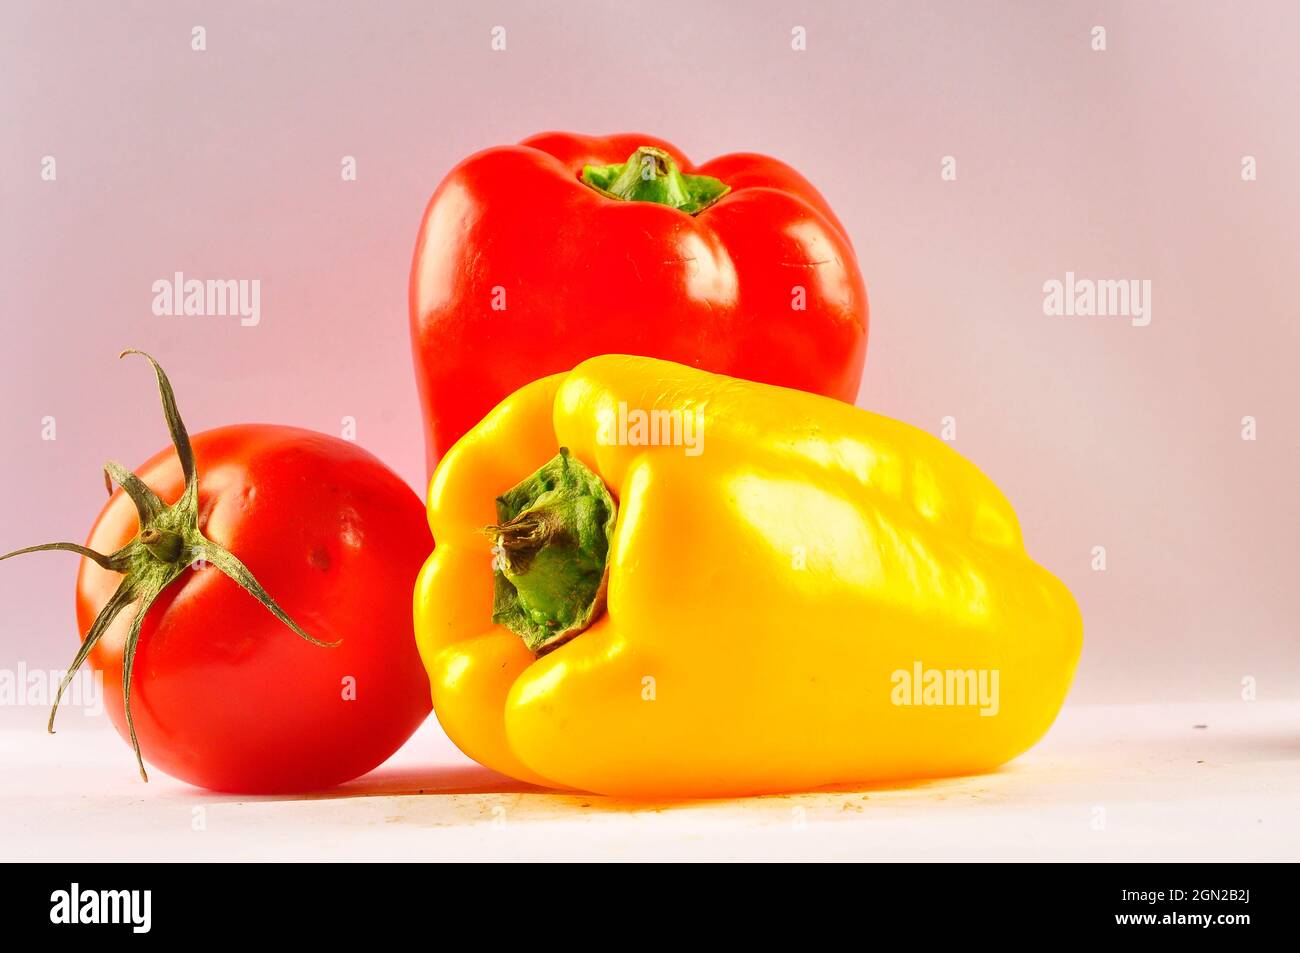 Yellow paper and tomato on the table Stock Photo